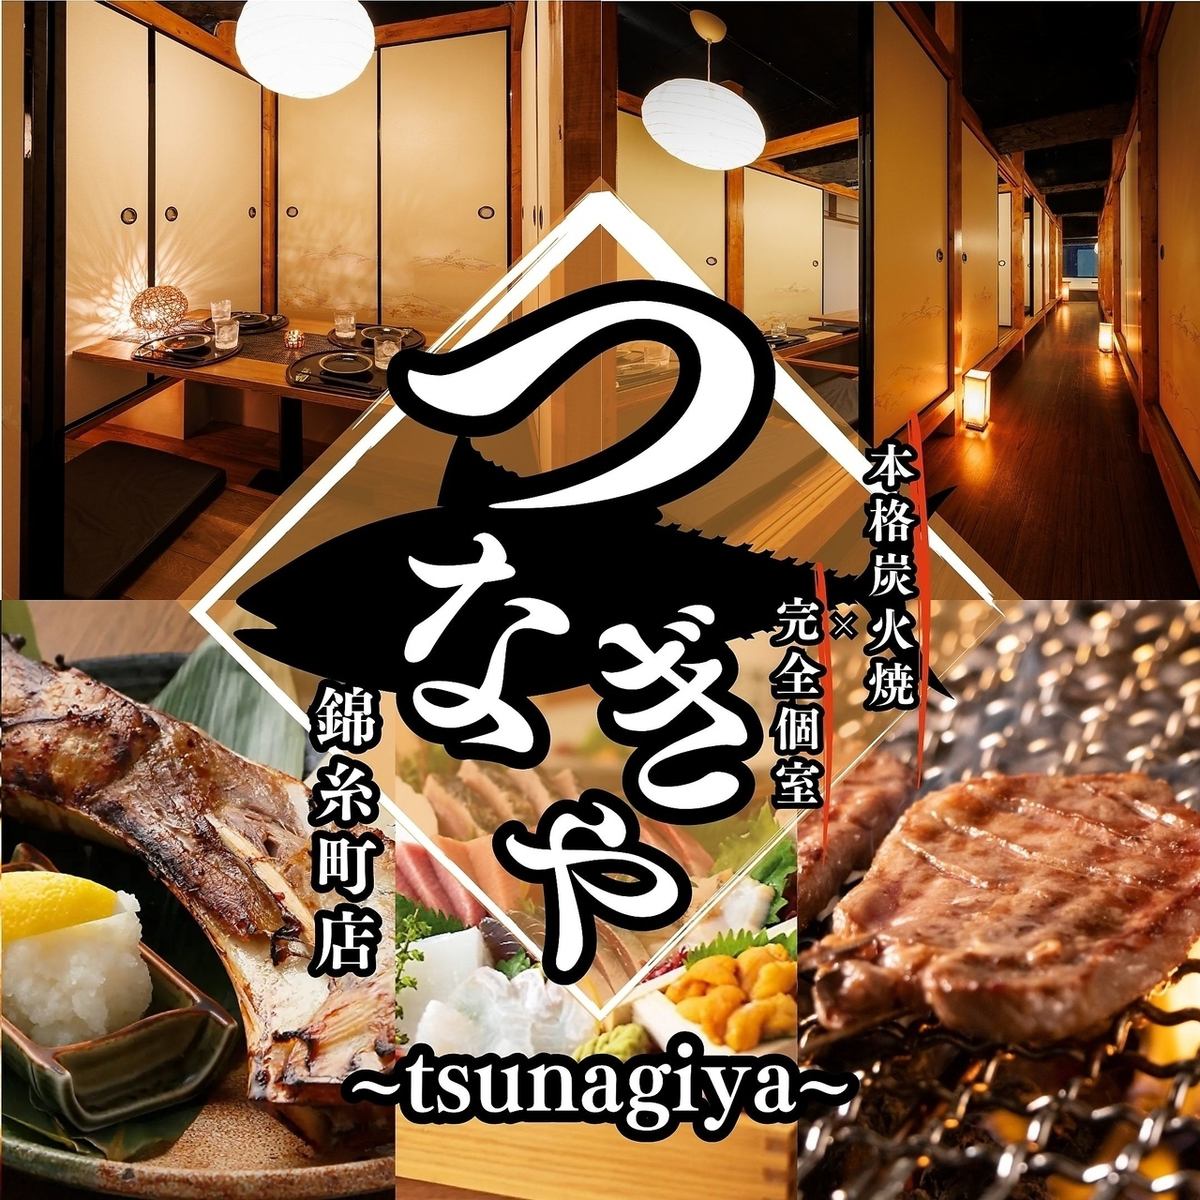 3 minutes walk from Kinshicho Station! All-you-can-drink course starts from 3,280 yen! Authentic charcoal grill x all seats in private rooms